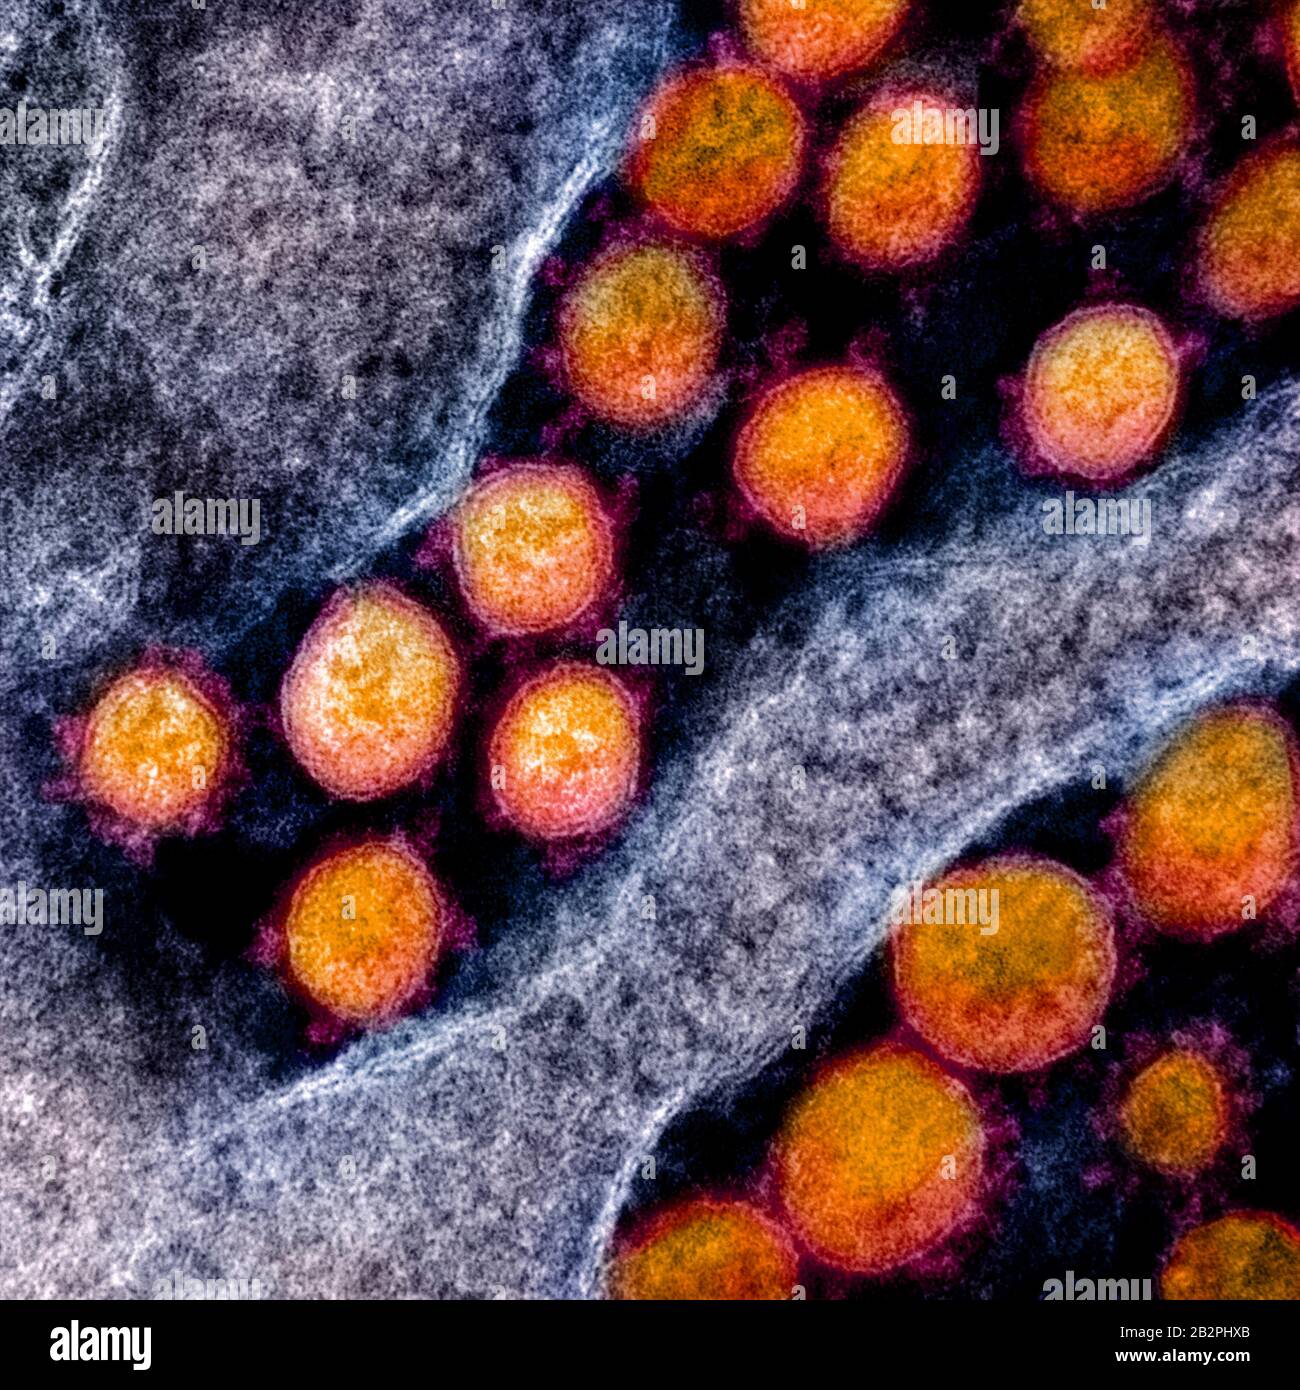 A transmission electron micrograph of COVID-19, novel coronavirus, virus particles, isolated from a patient captured and color-enhanced at the NIAID Integrated Research Facility February 28, 2020 in Fort Detrick, Maryland. Stock Photo